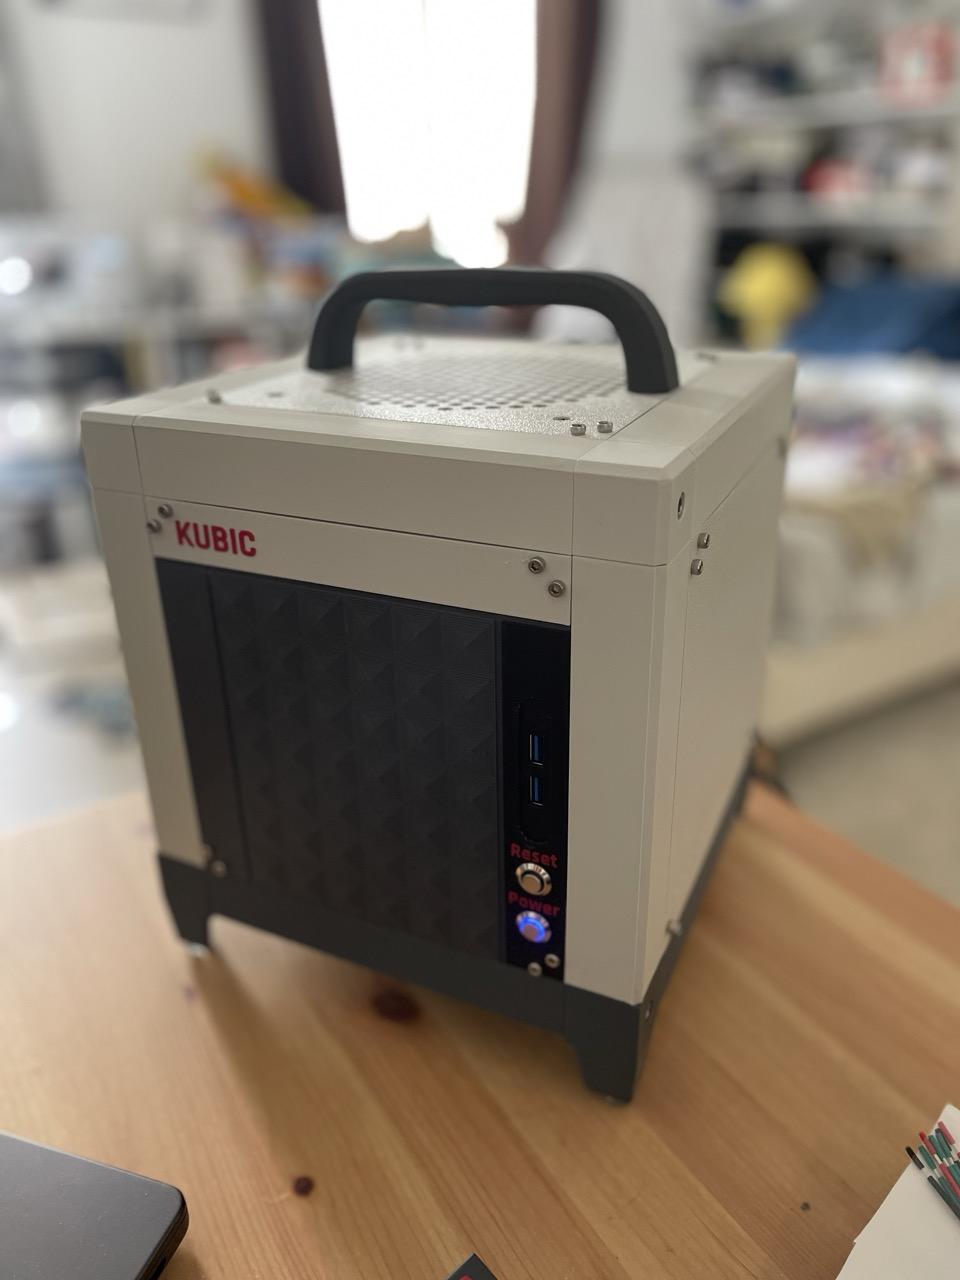 Kubic - a Printable ITX PC Case With a Handle